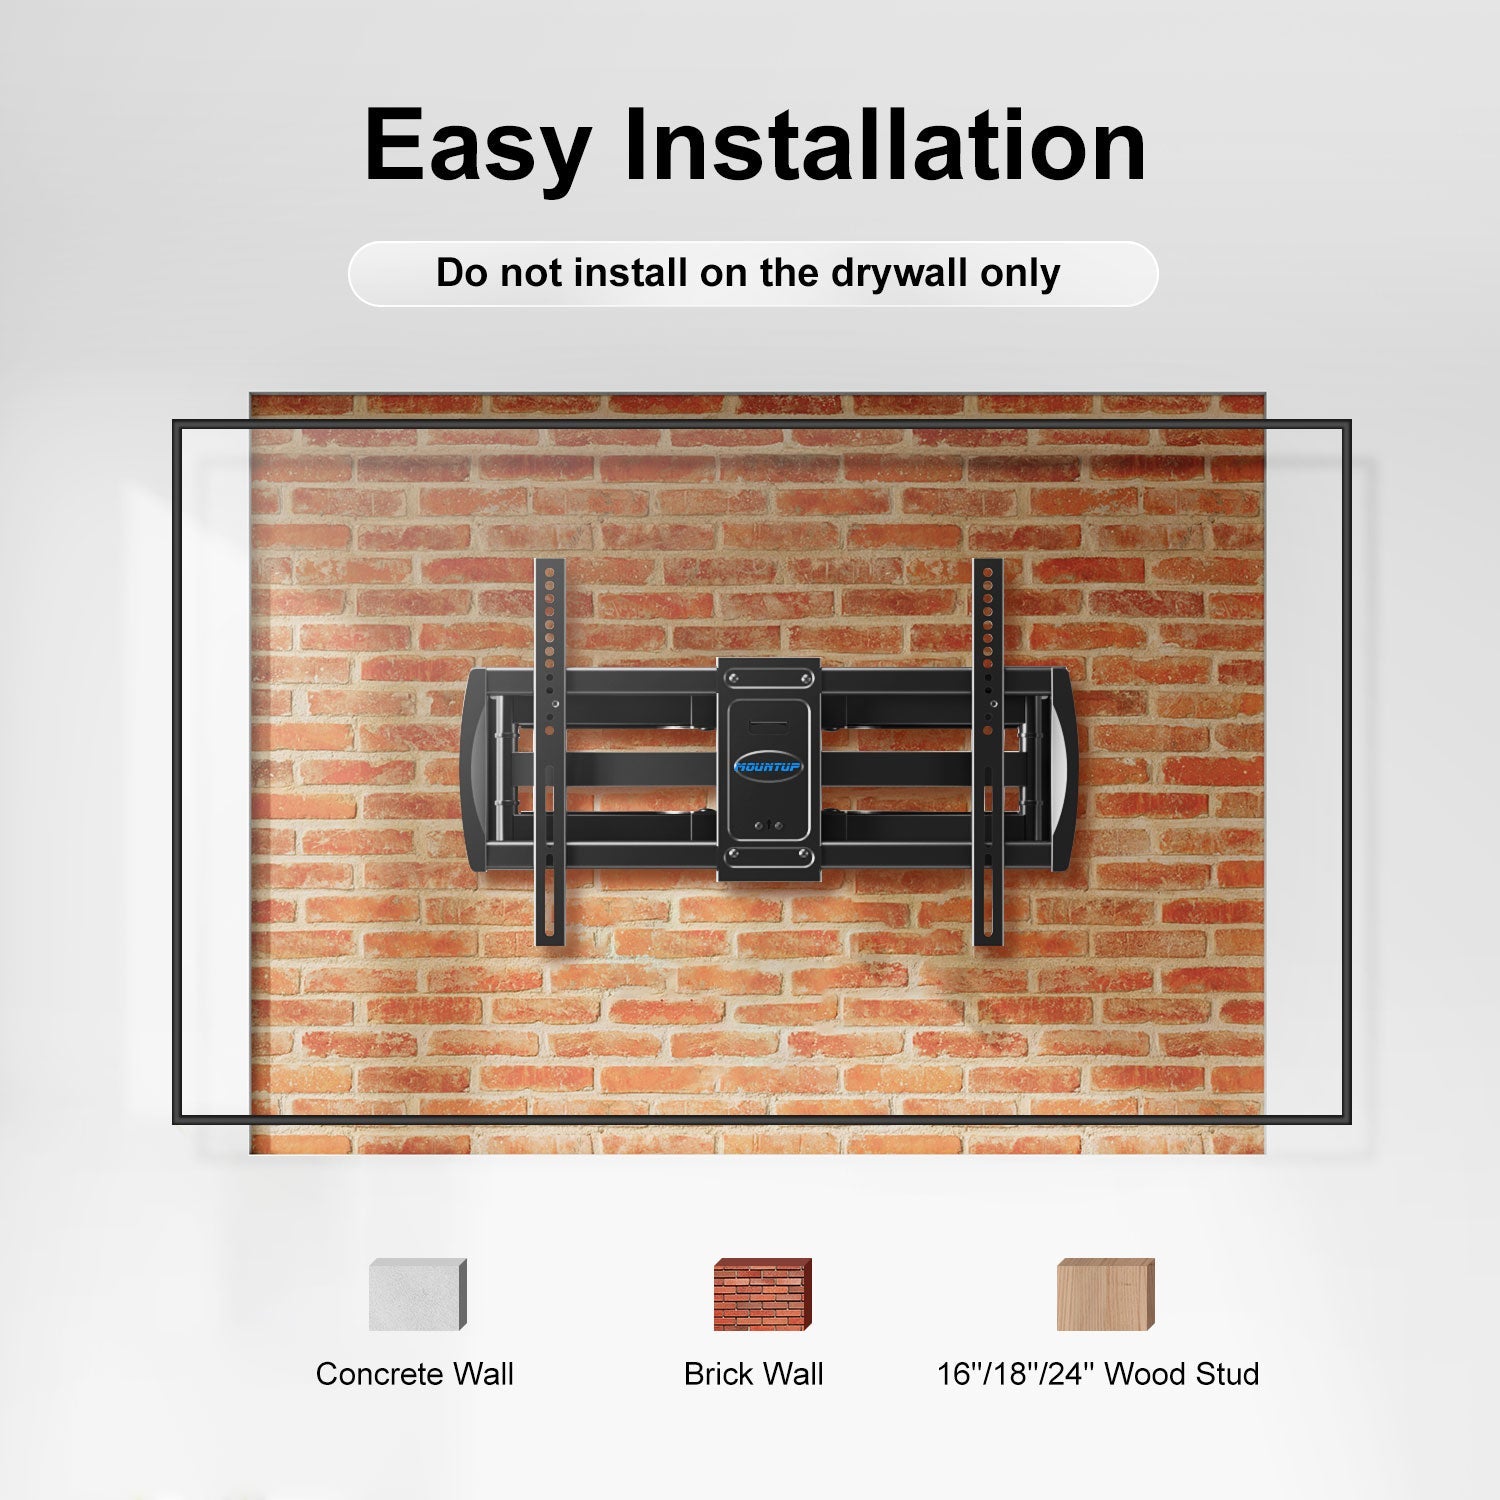 install a full motion TV wall mount on 16''/18''/24'' wood stud or concrete/brick wall